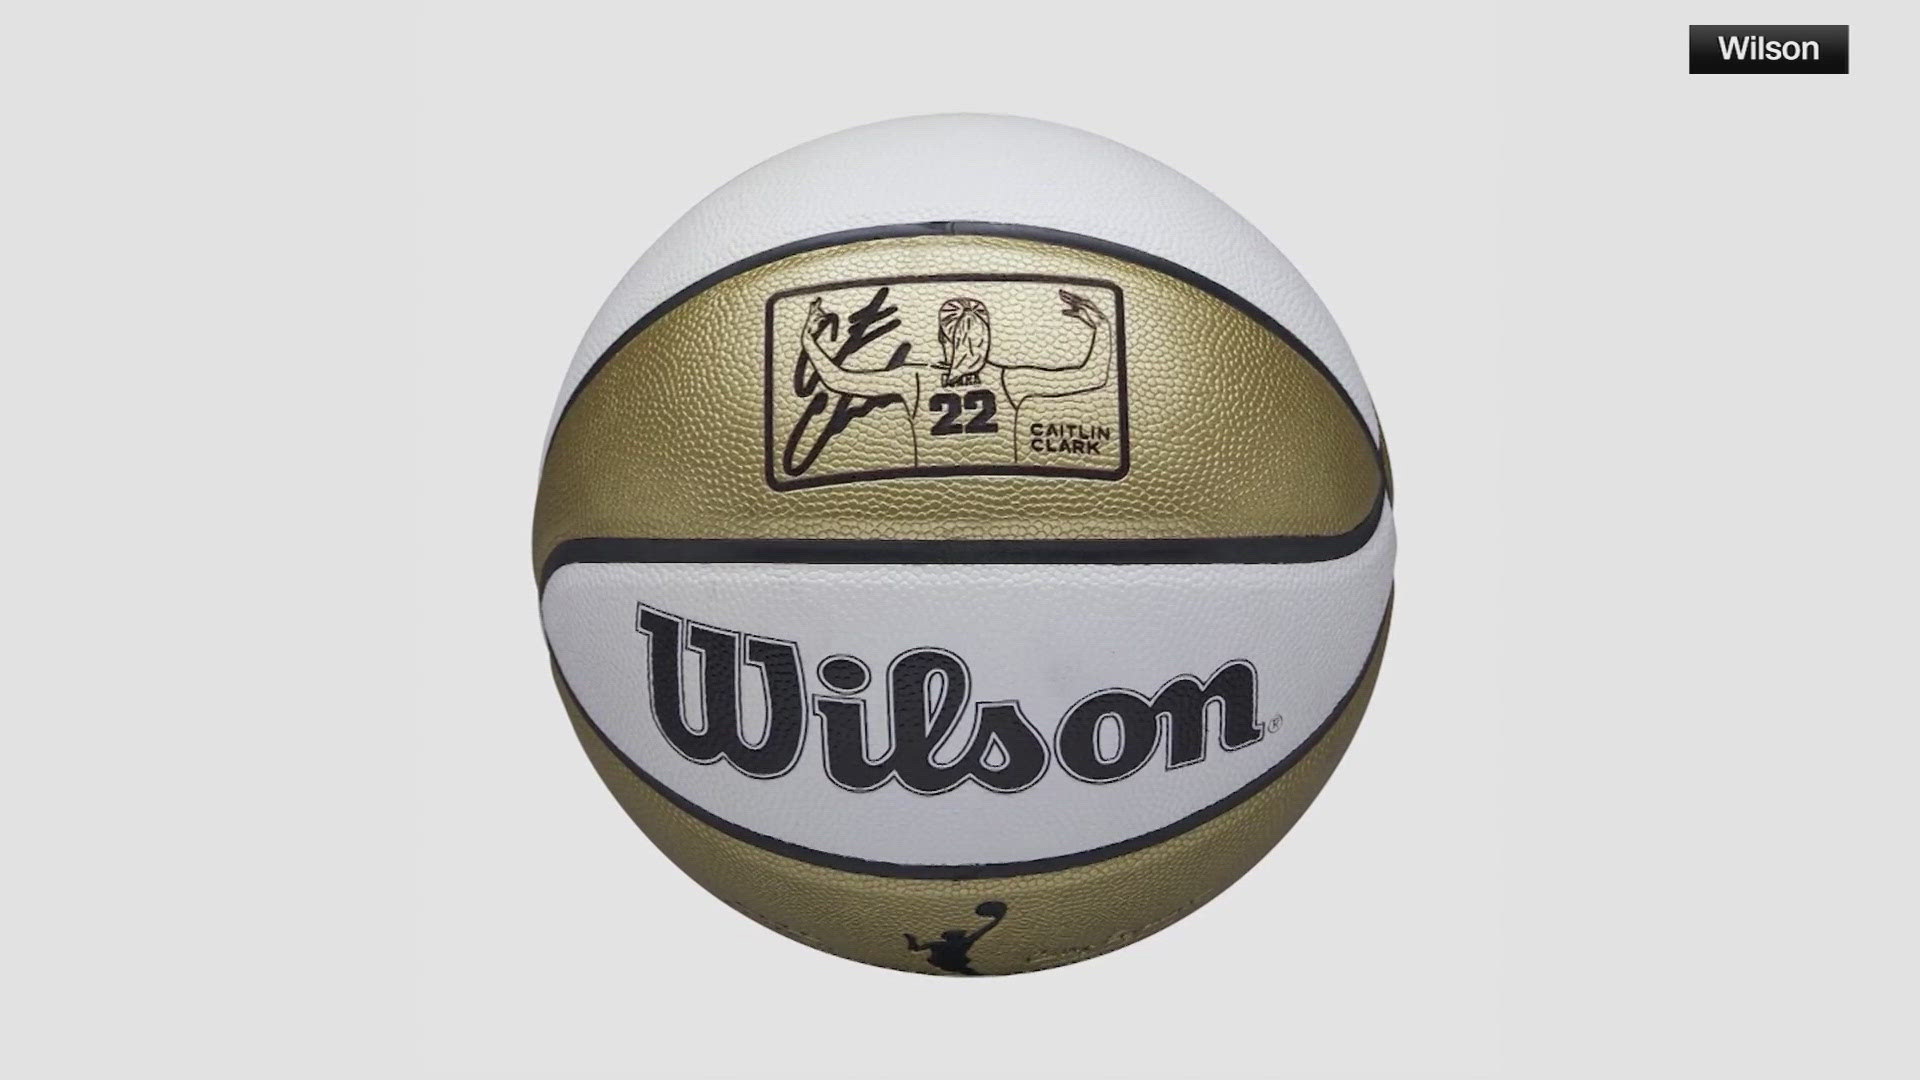 As part of her role, Clark will "test, advise and provide feedback on a range of Wilson basketball products," the company said.